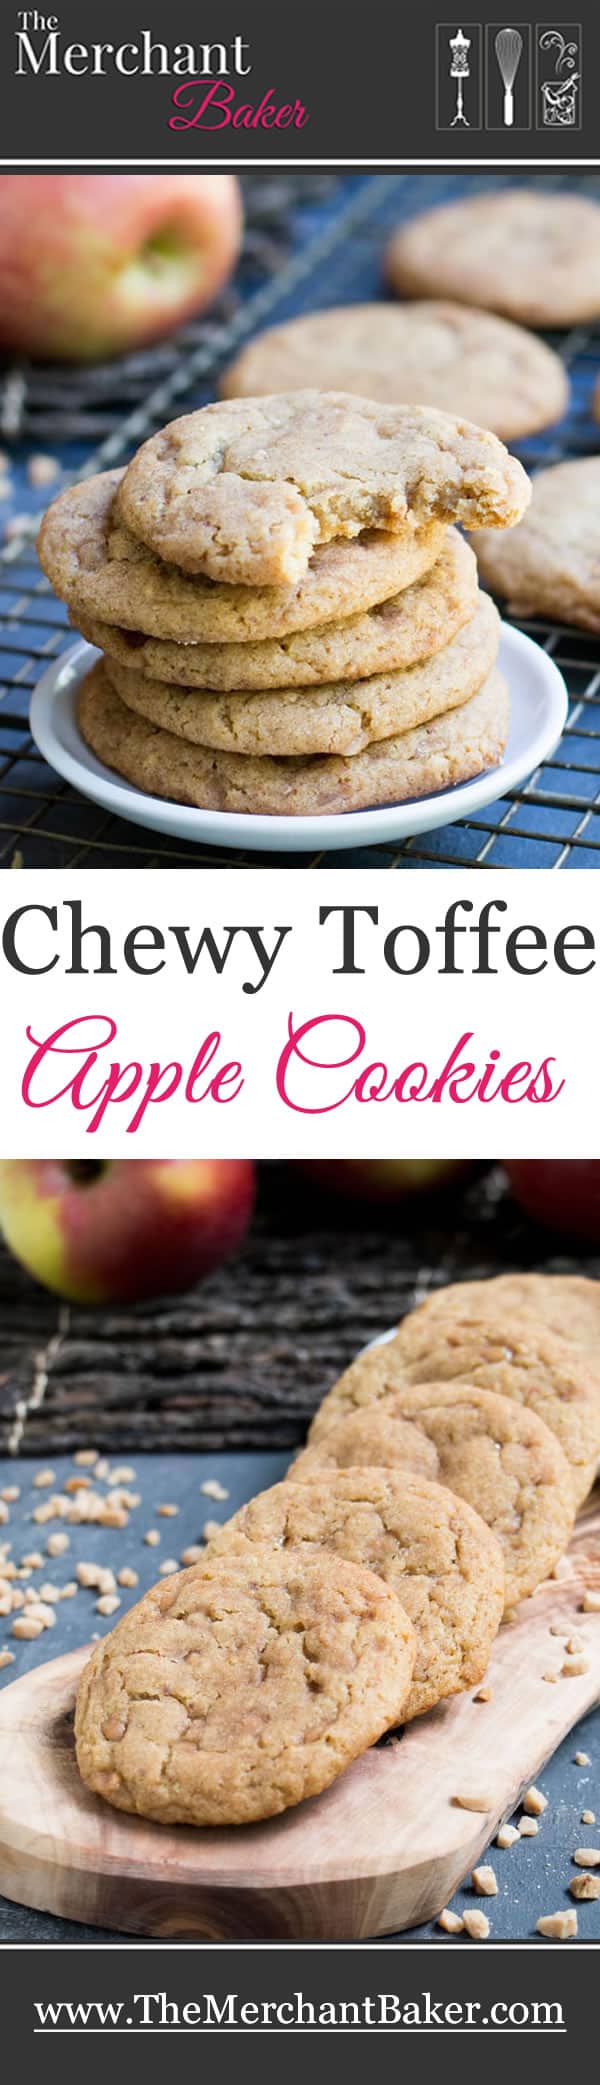 Chewy Toffee Apple Cookies